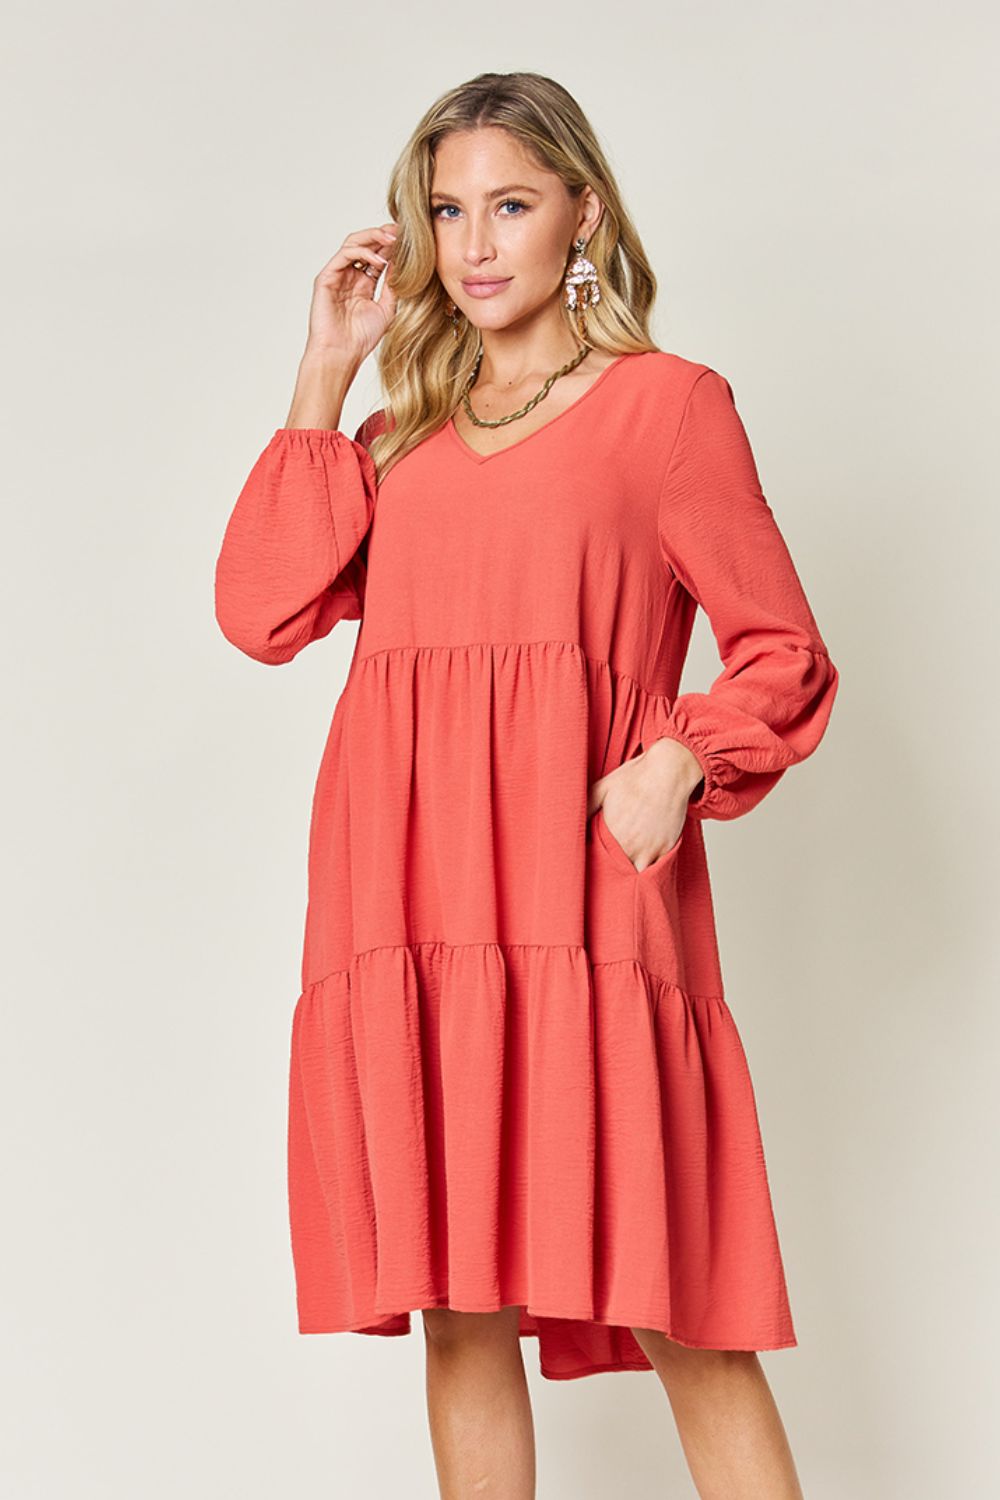 Balloon Sleeve Tiered Dress - All Sizes